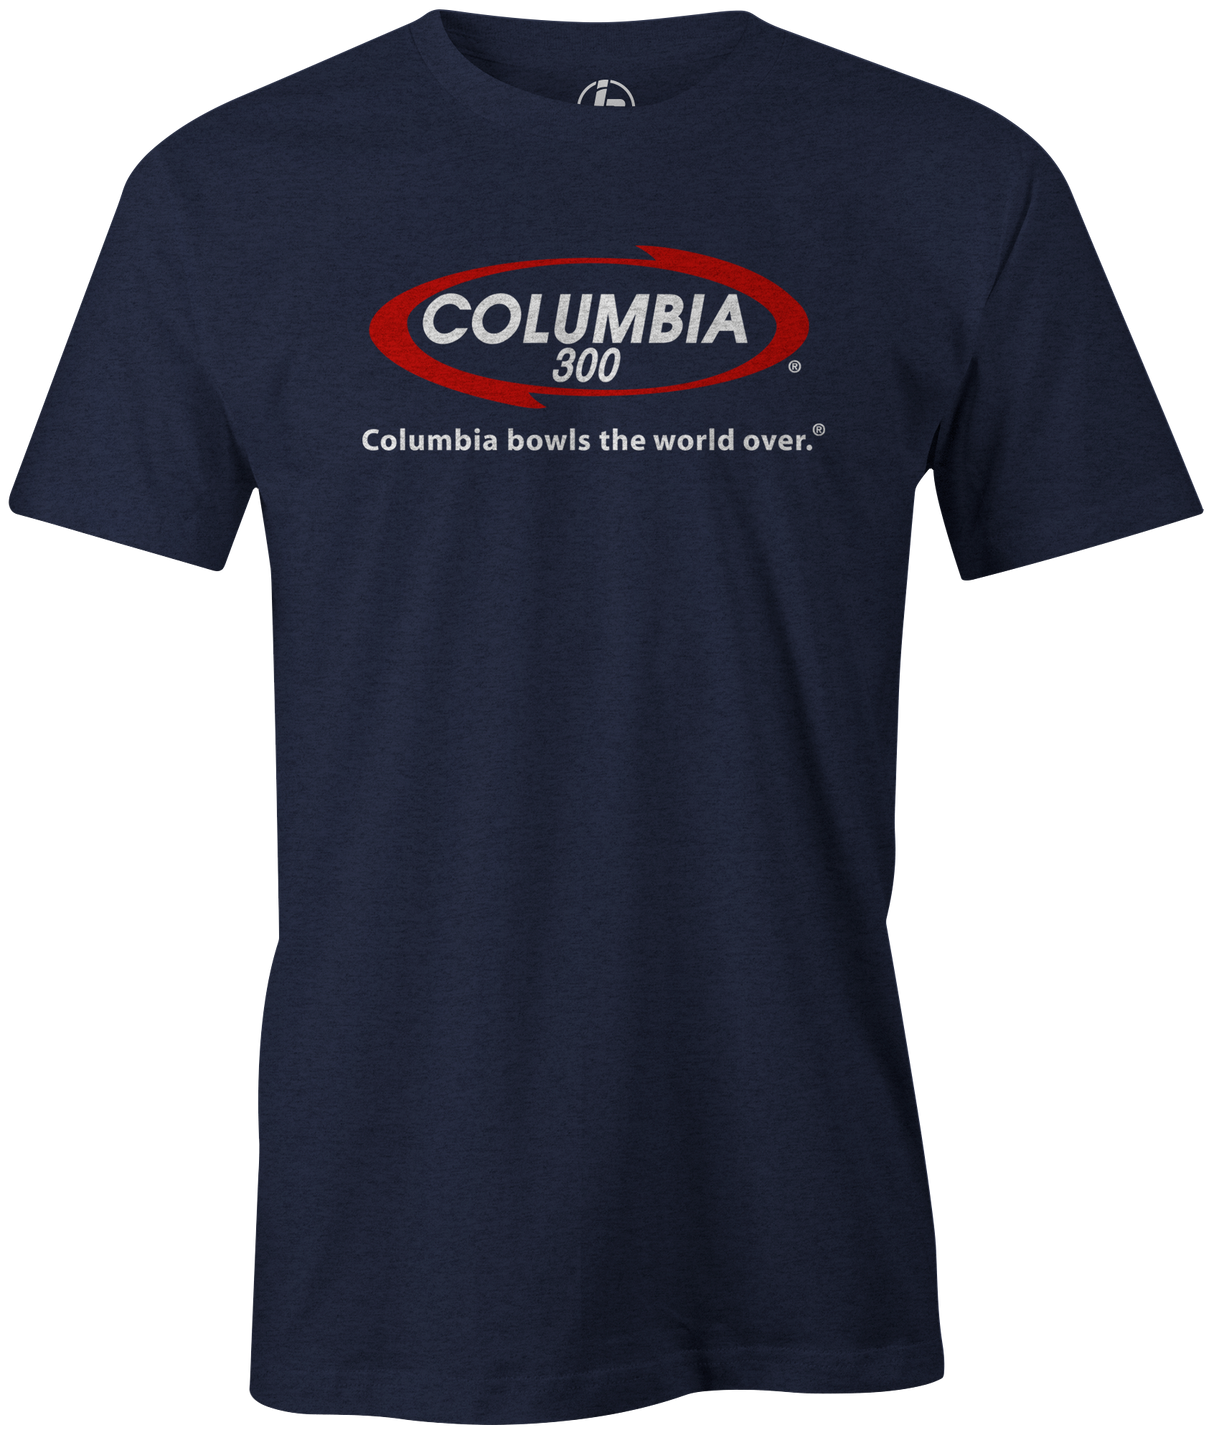 Columbia 300 Bowling T-Shirt | Bowls The World Over Navy